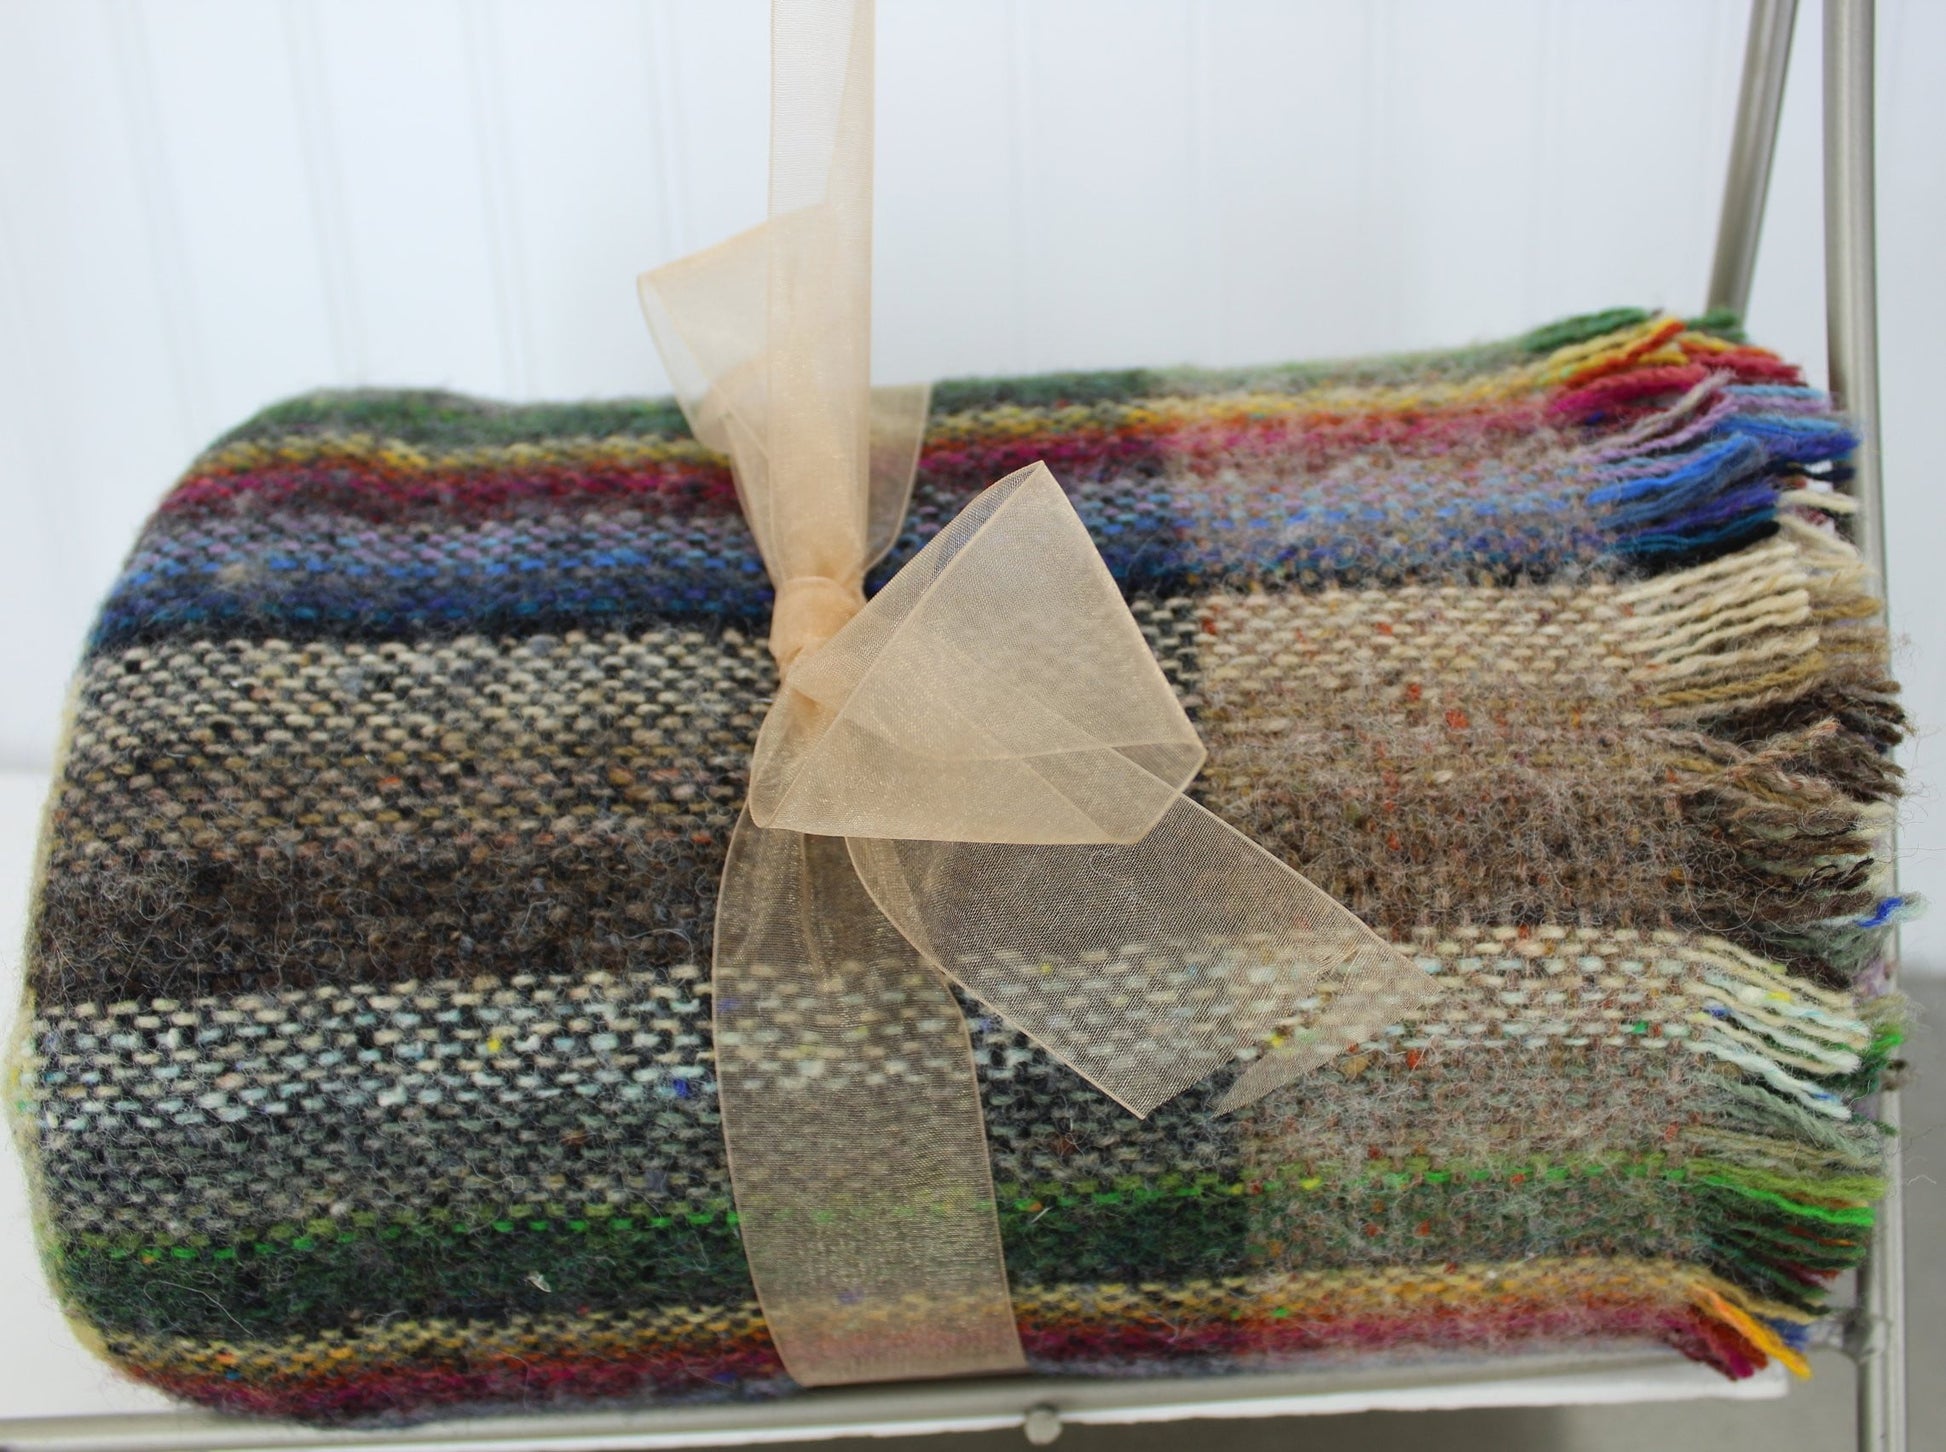 Donegal Handwoven Tweed John Molloy Throw Blanket - Lambswool Fringed Awesome gorgeous throw ireland